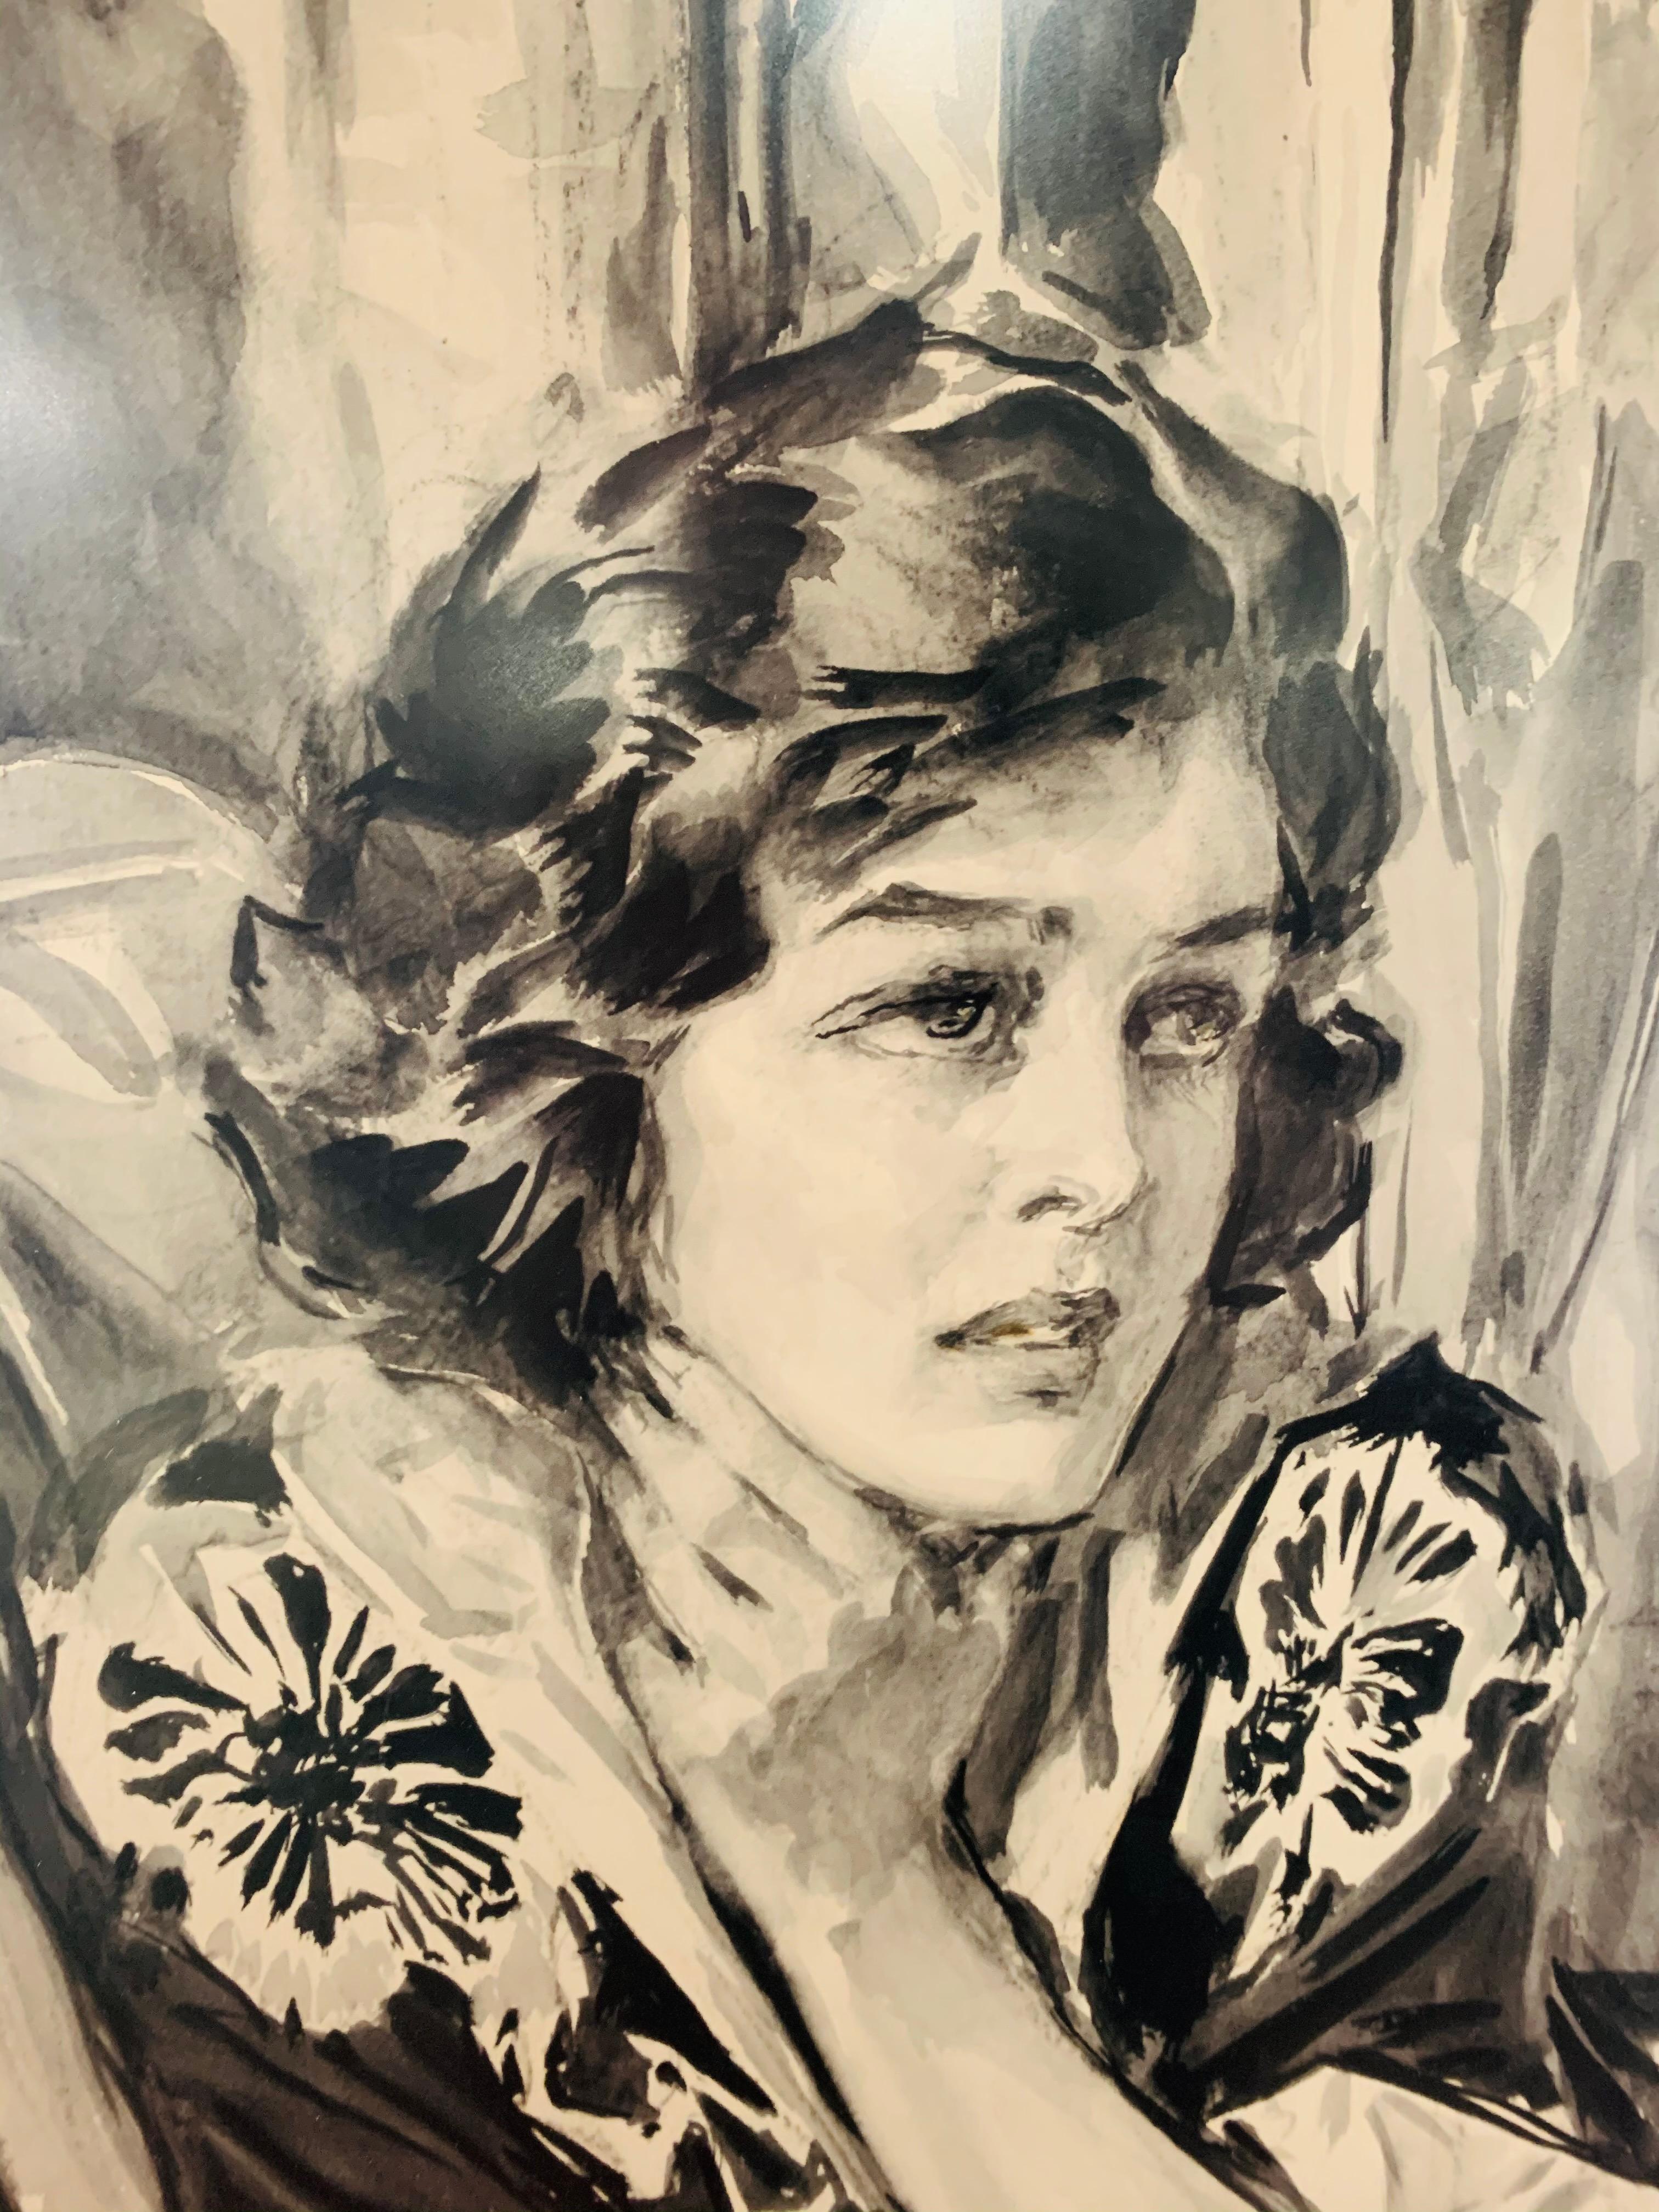 This watercolor portrait was made by Howard Chandler Christy (1873-1952, American)and dedicated to his long time friend Anita Shonover in 1940. The portrait is signed dated and inscribed 